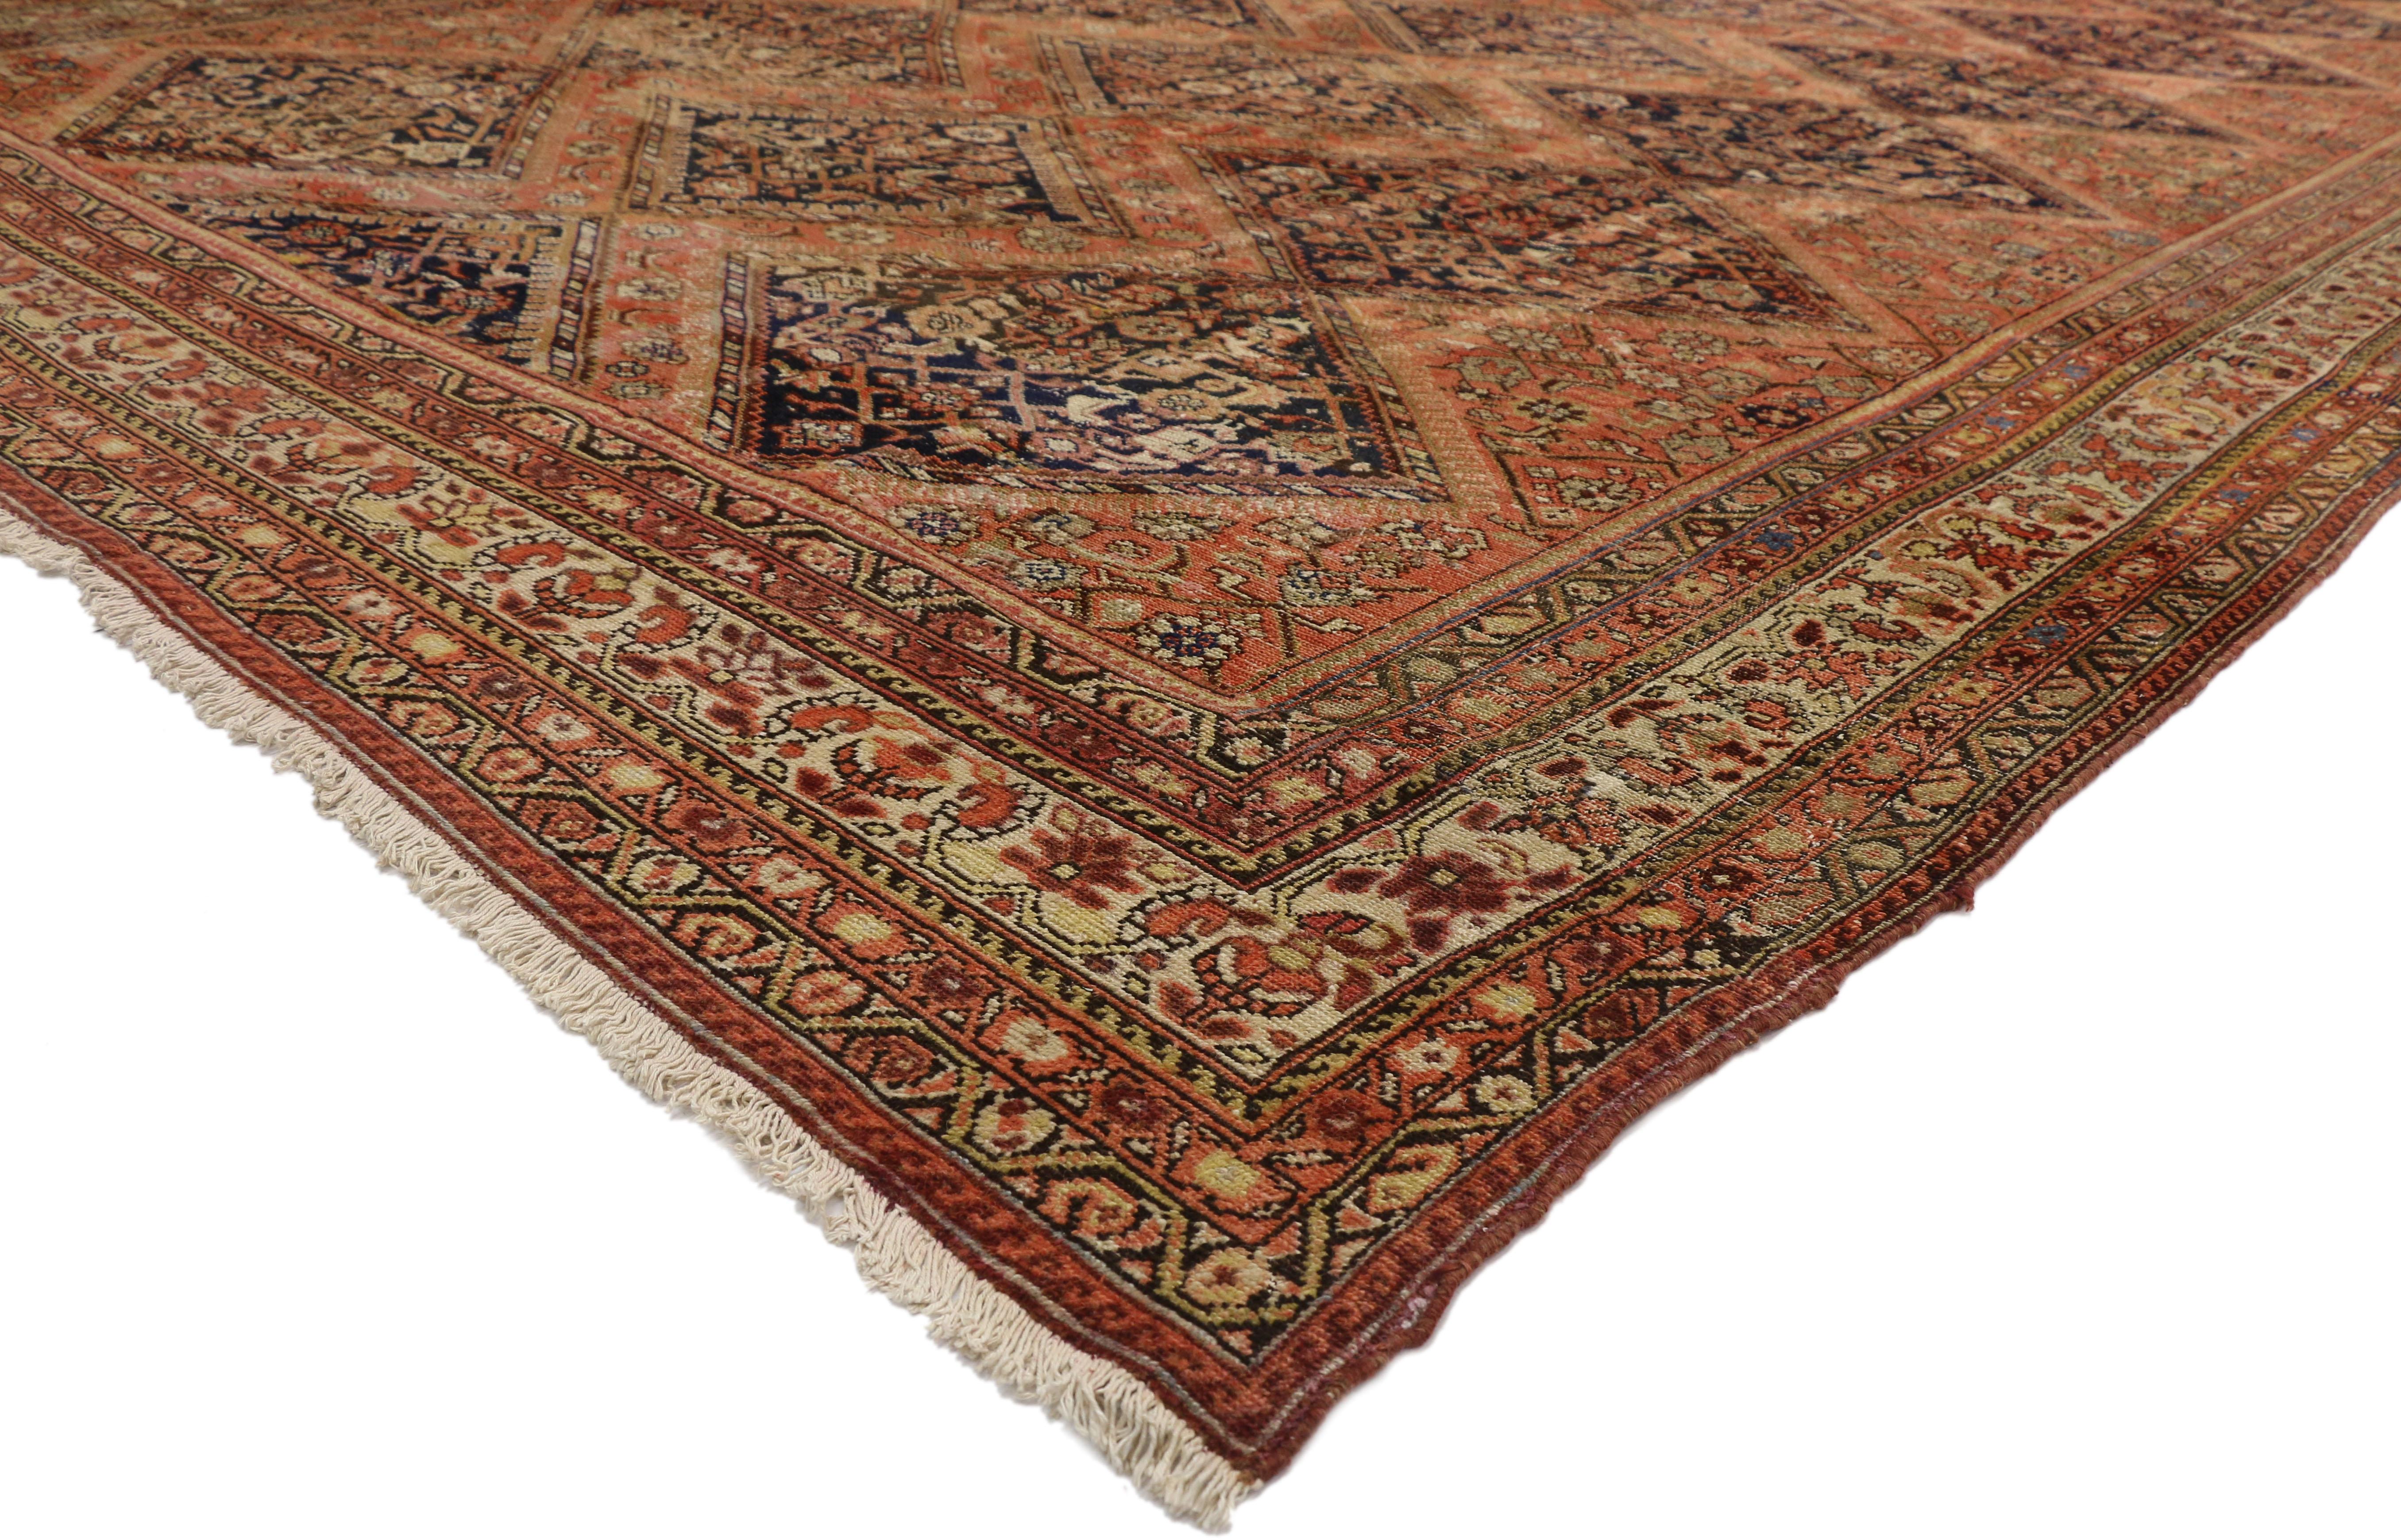 74262 Distressed Antique Persian Malayer Palace Rug with Rustic Artisan Elizabethan Style. An elaborate design of diamonds creates a mesmerizing sense of well-balanced proportions in this distressed antique Persian Malayer rug with modern industrial